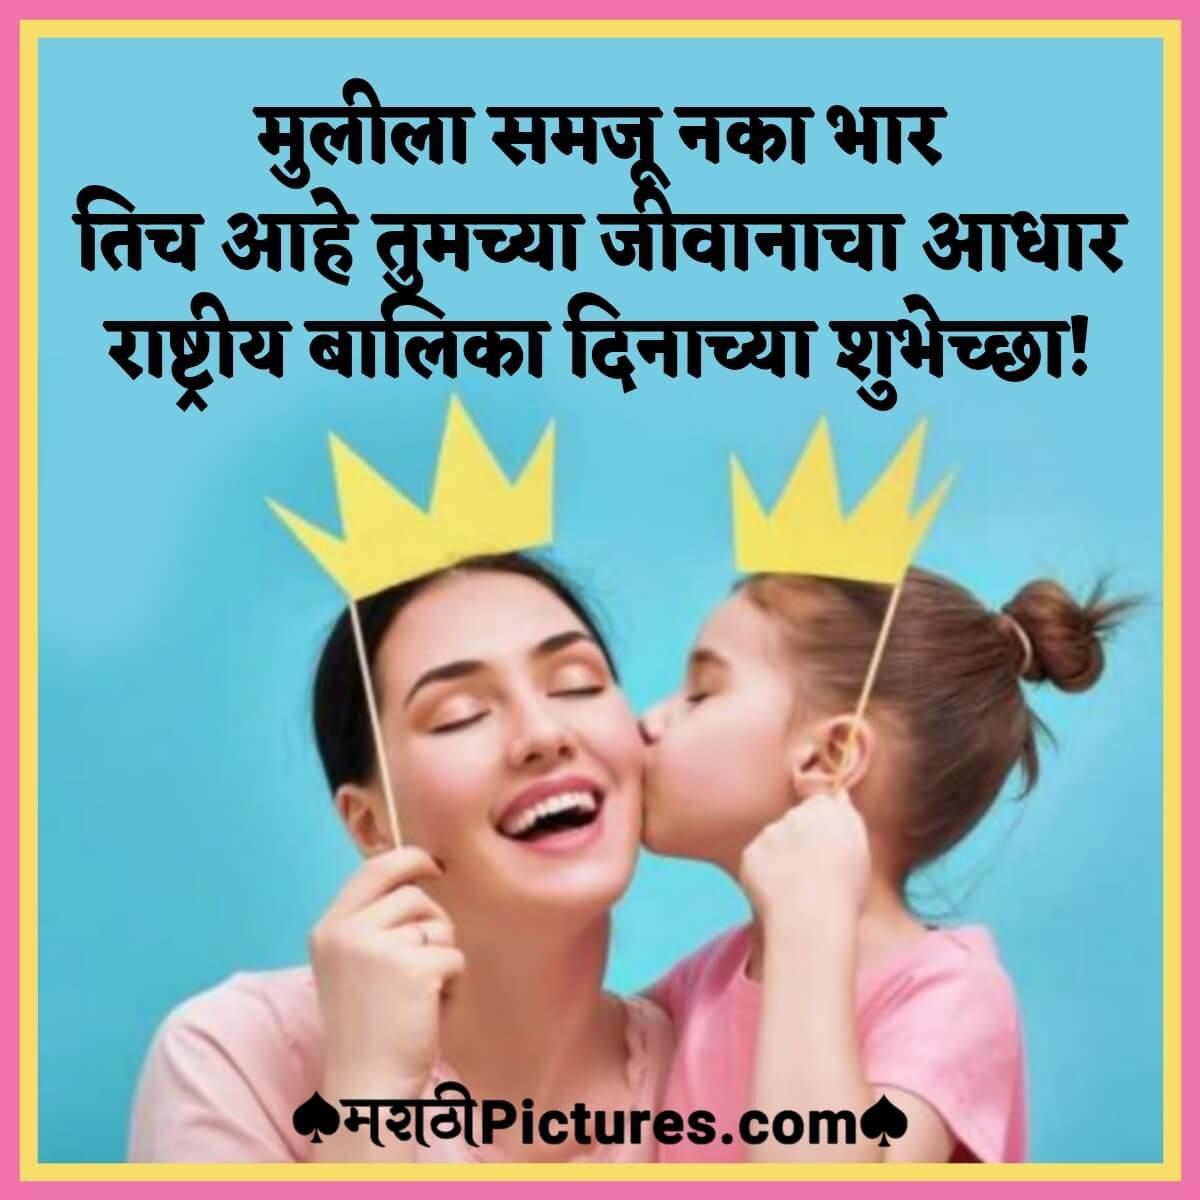 National Girl Child Day Quote In Marathi